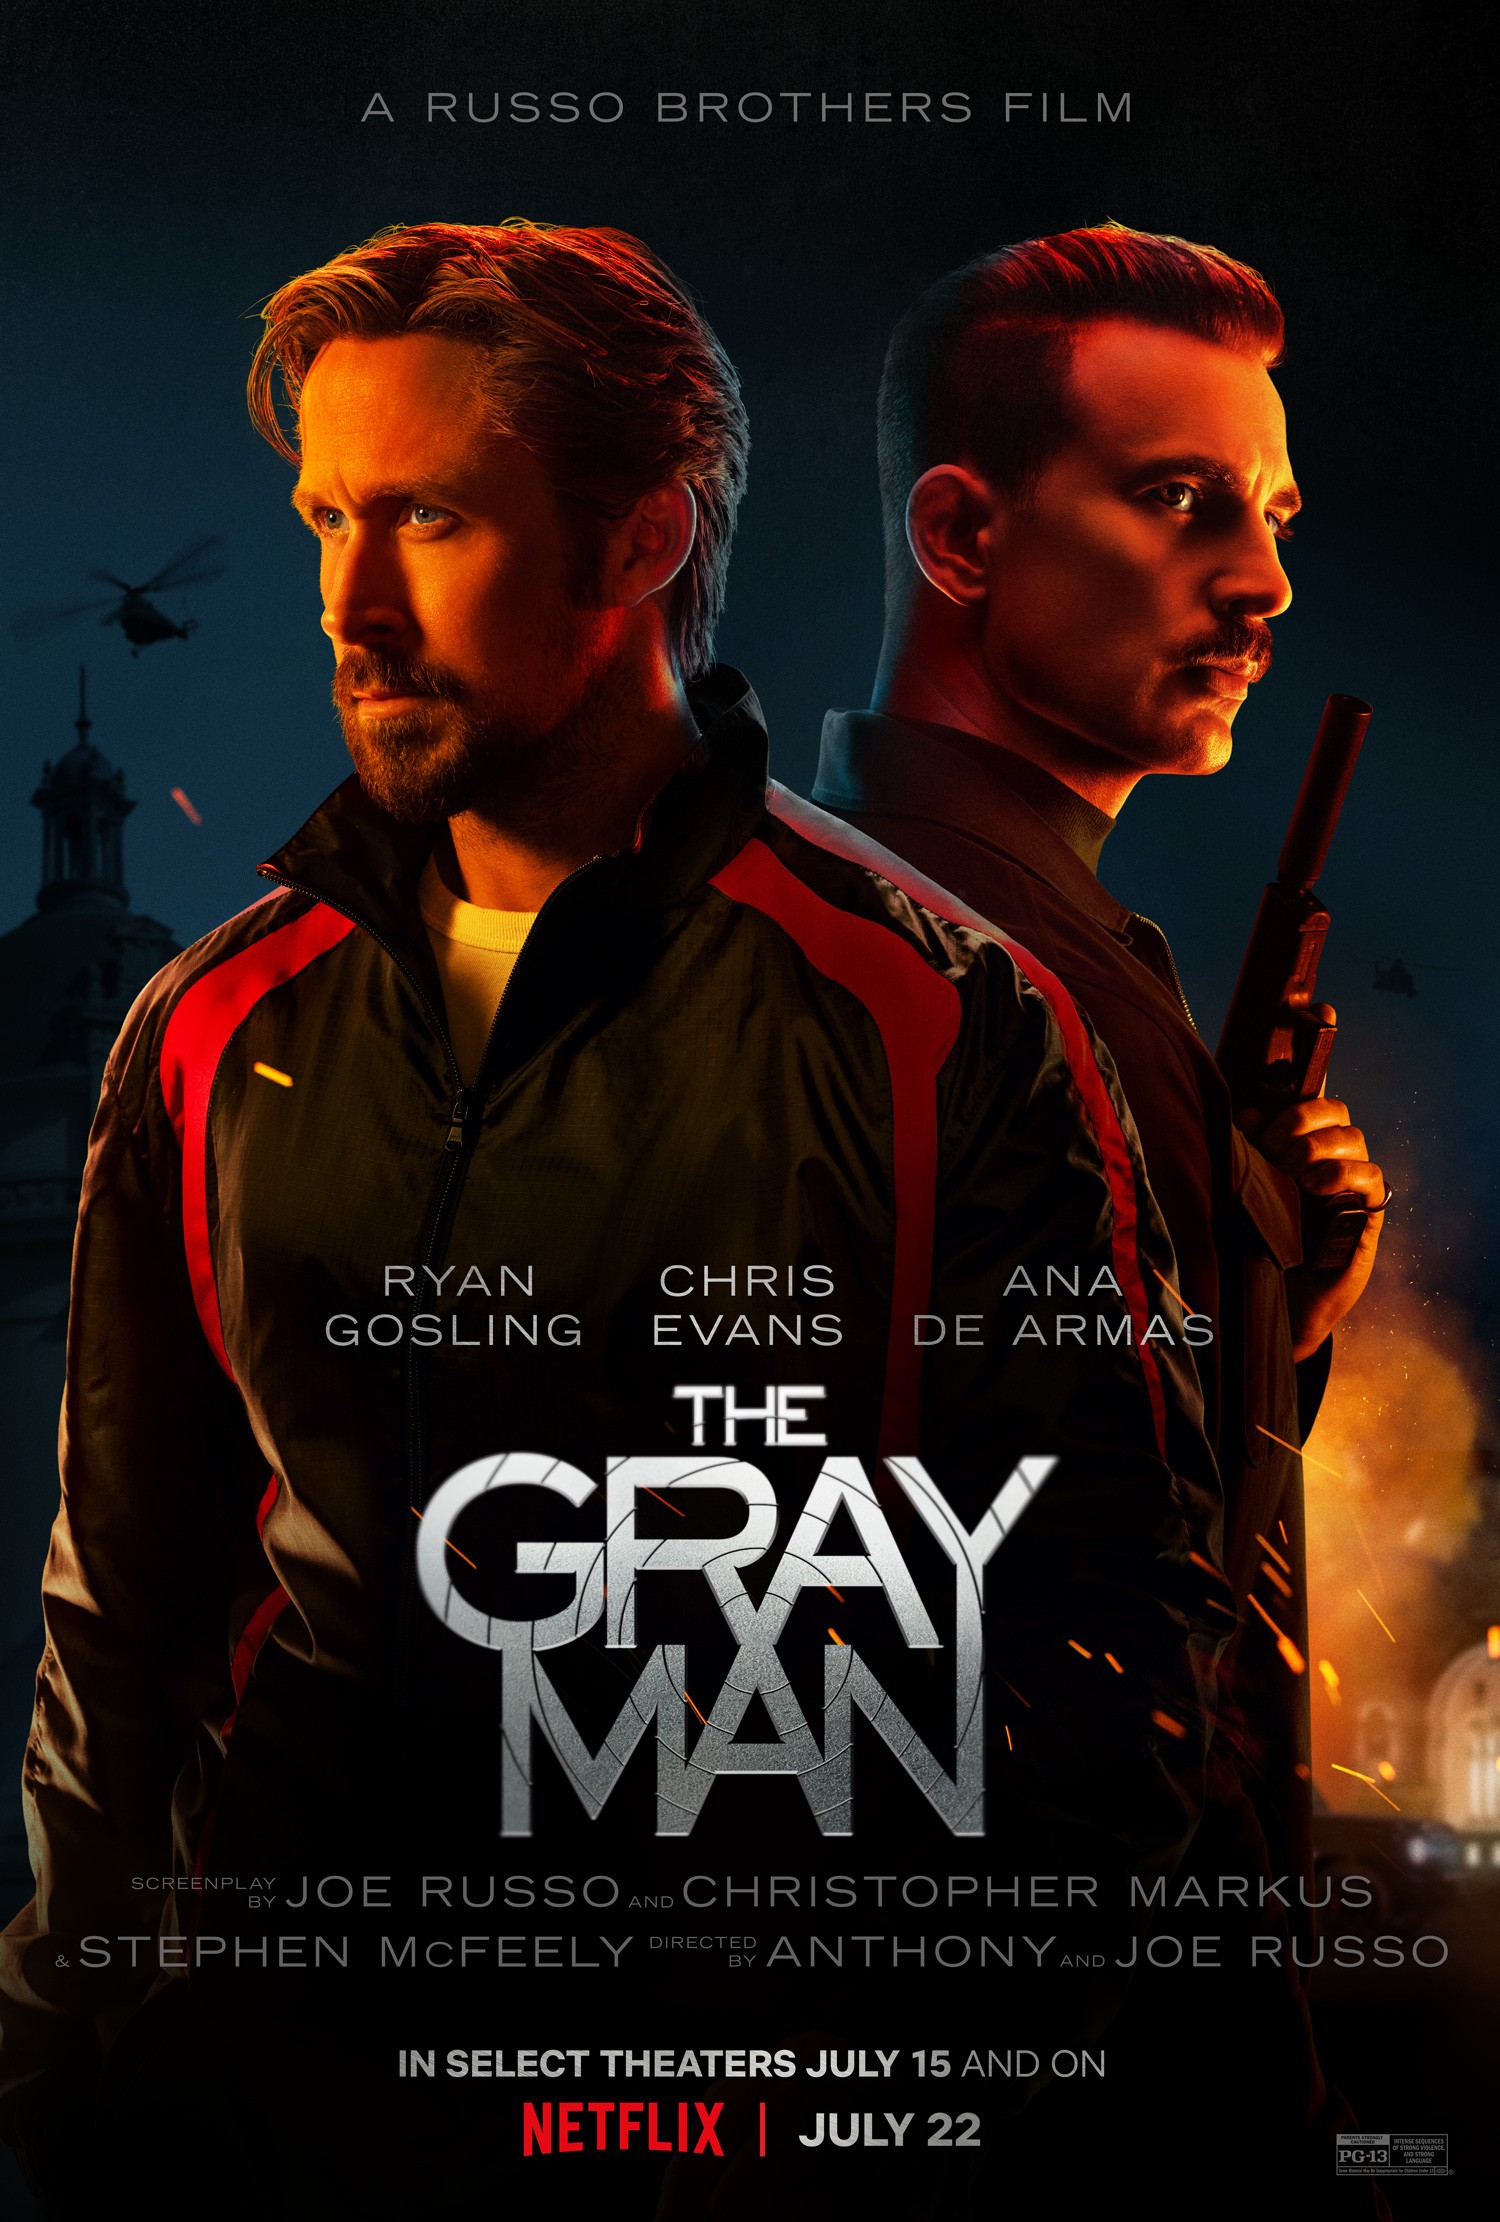 STREAMING REVIEW: The Gray Man